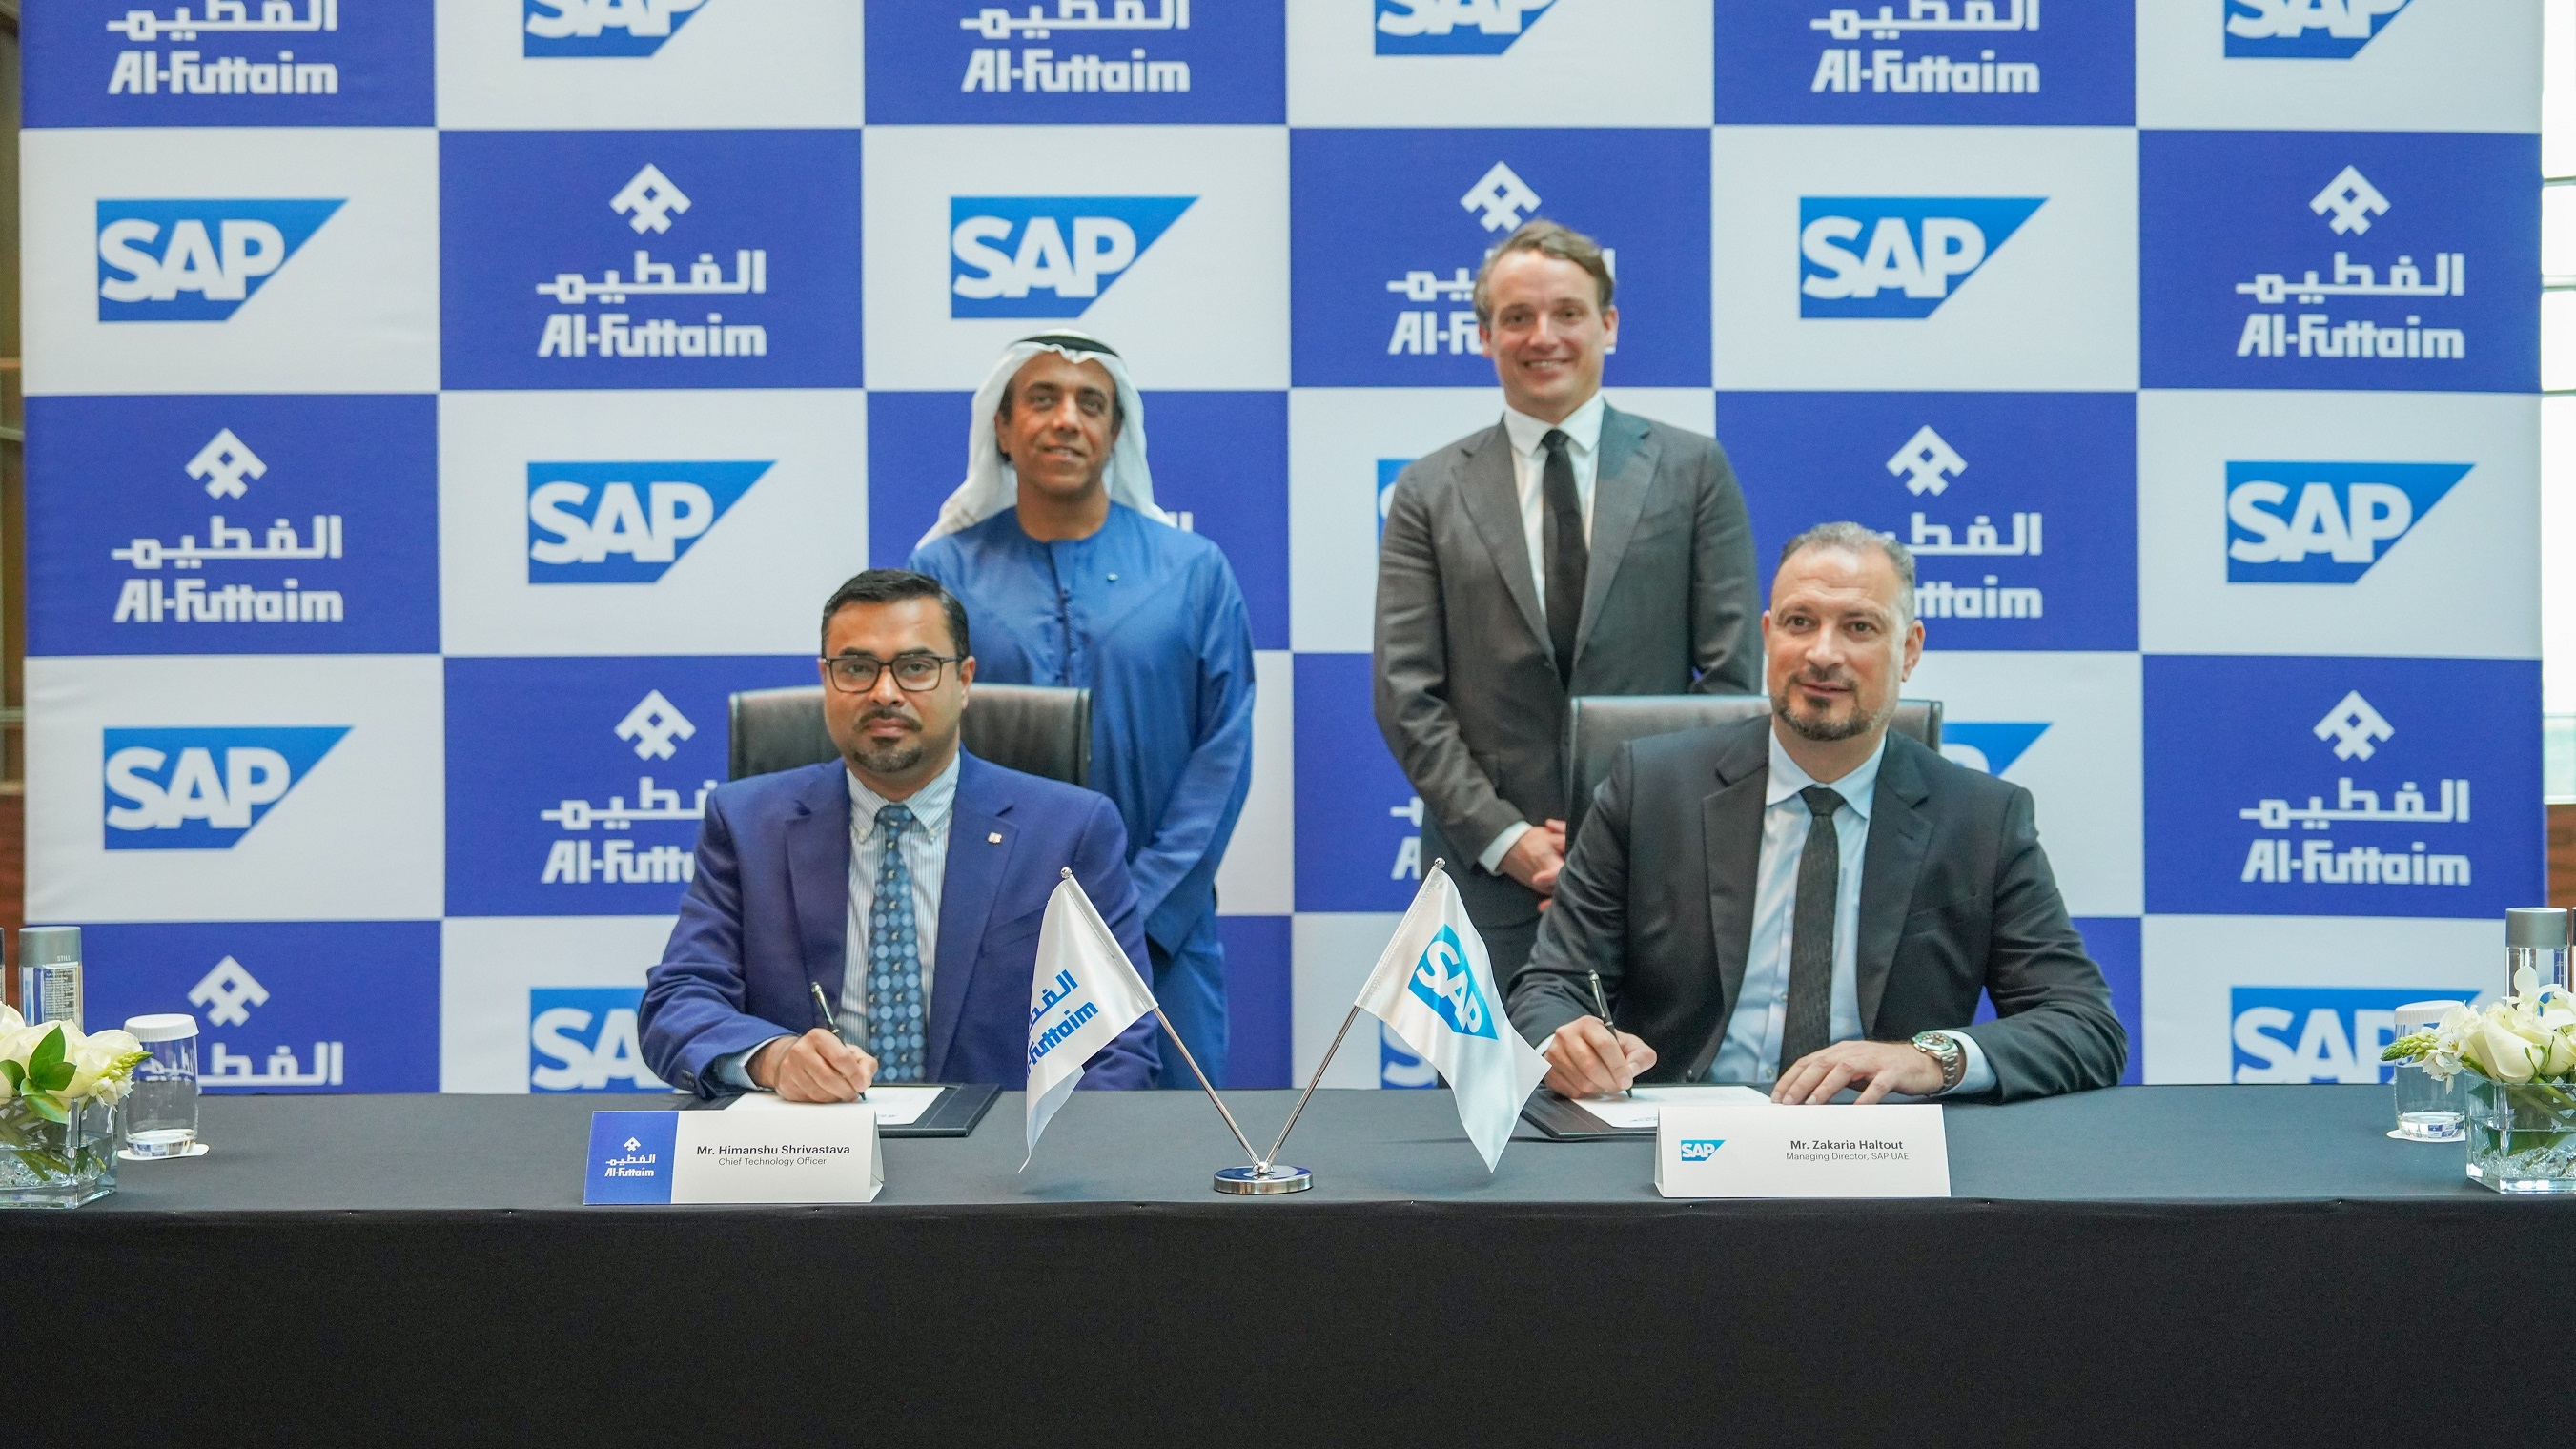 Al-Futtaim Group Partners with SAP to Enable Digital Transformation